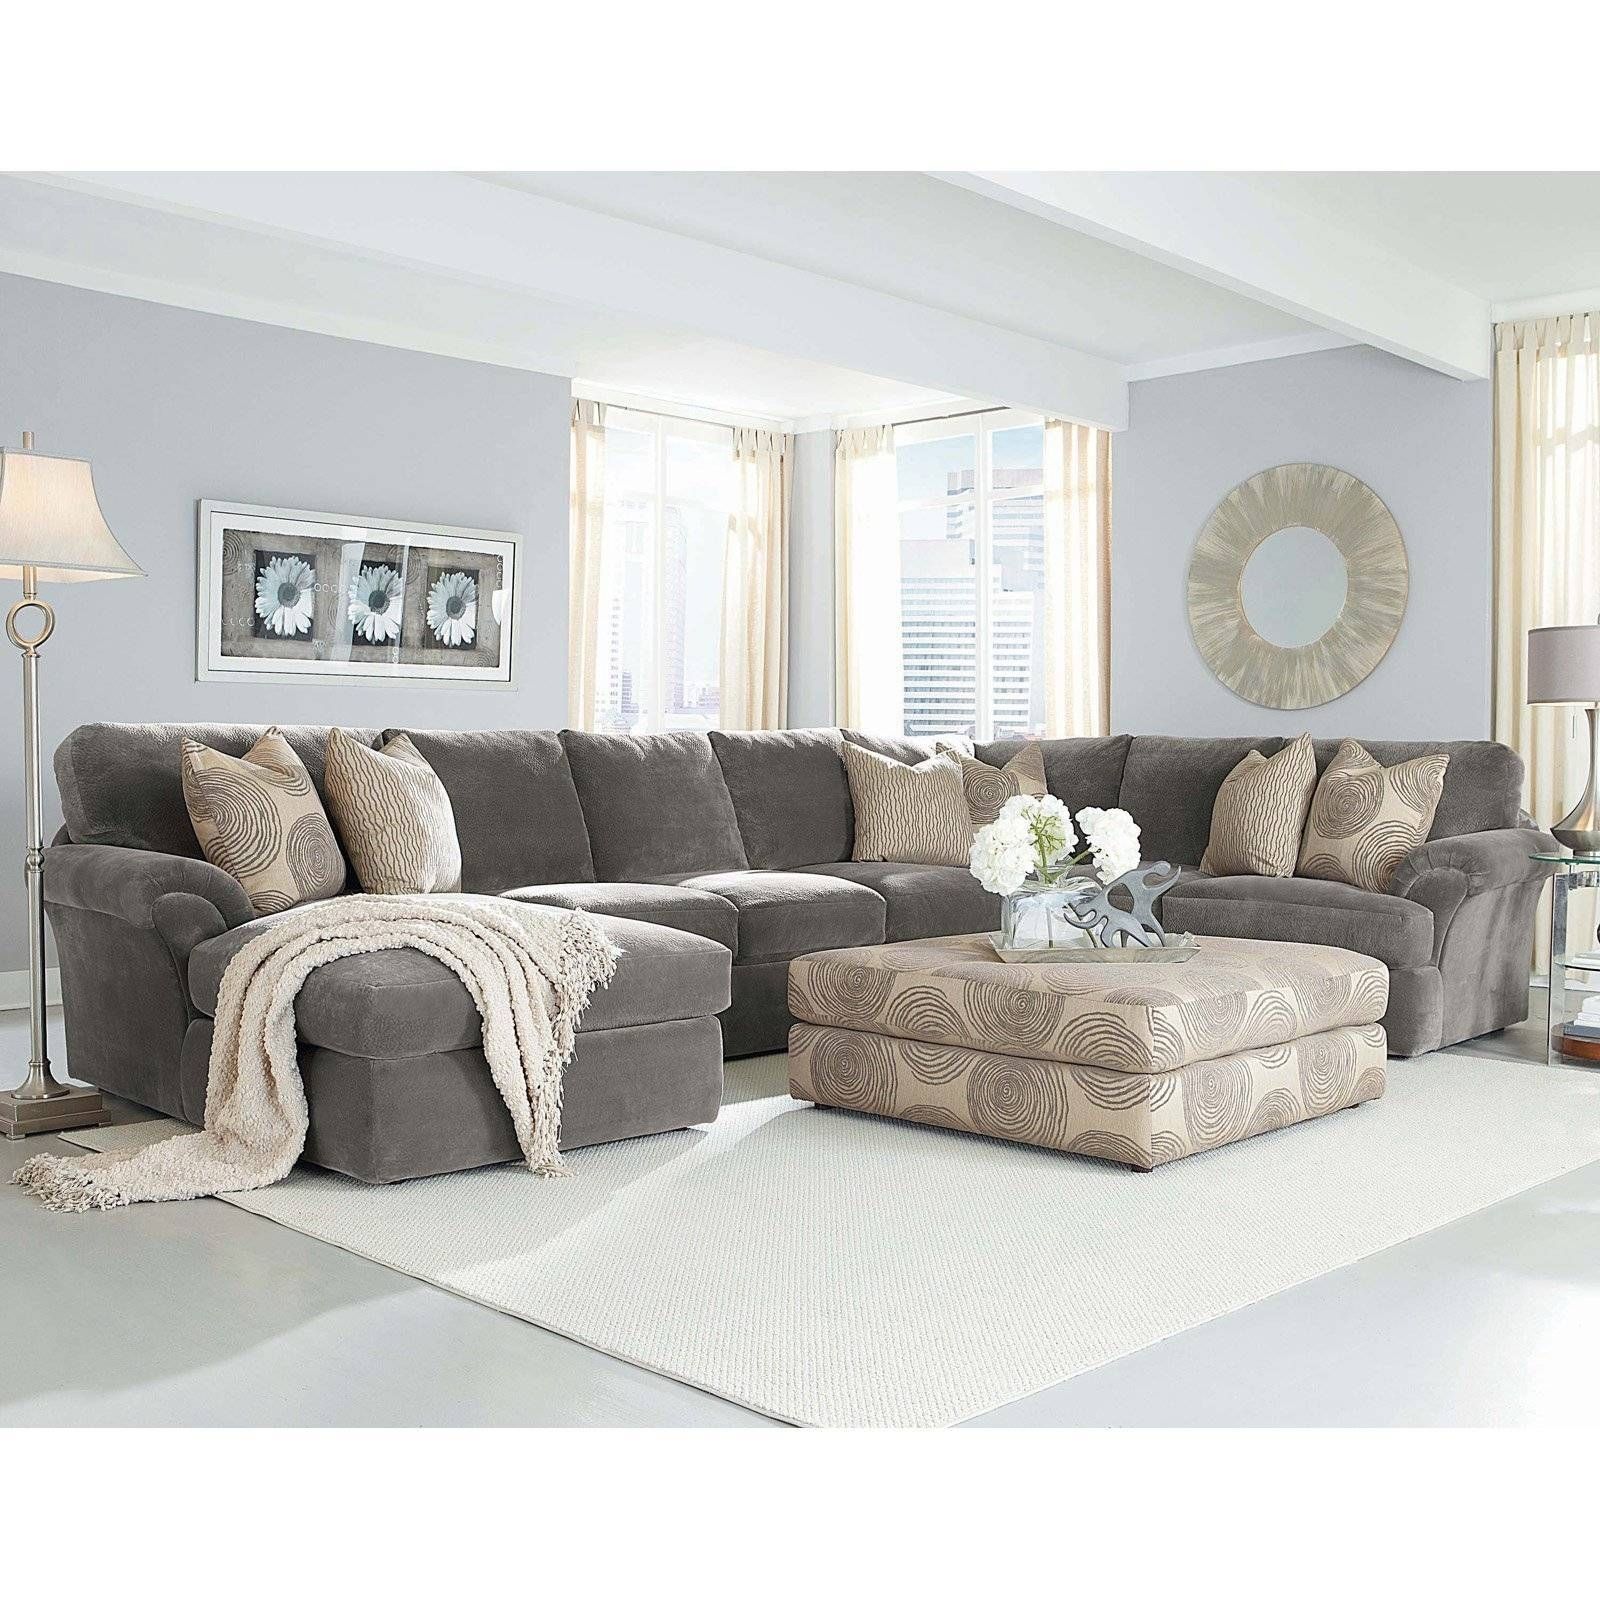 41+ Incredible Photos Of Grey Sectional Living Room Ideas Ideas Throughout Dark Gray Sectional Sofas (Gallery 4 of 20)